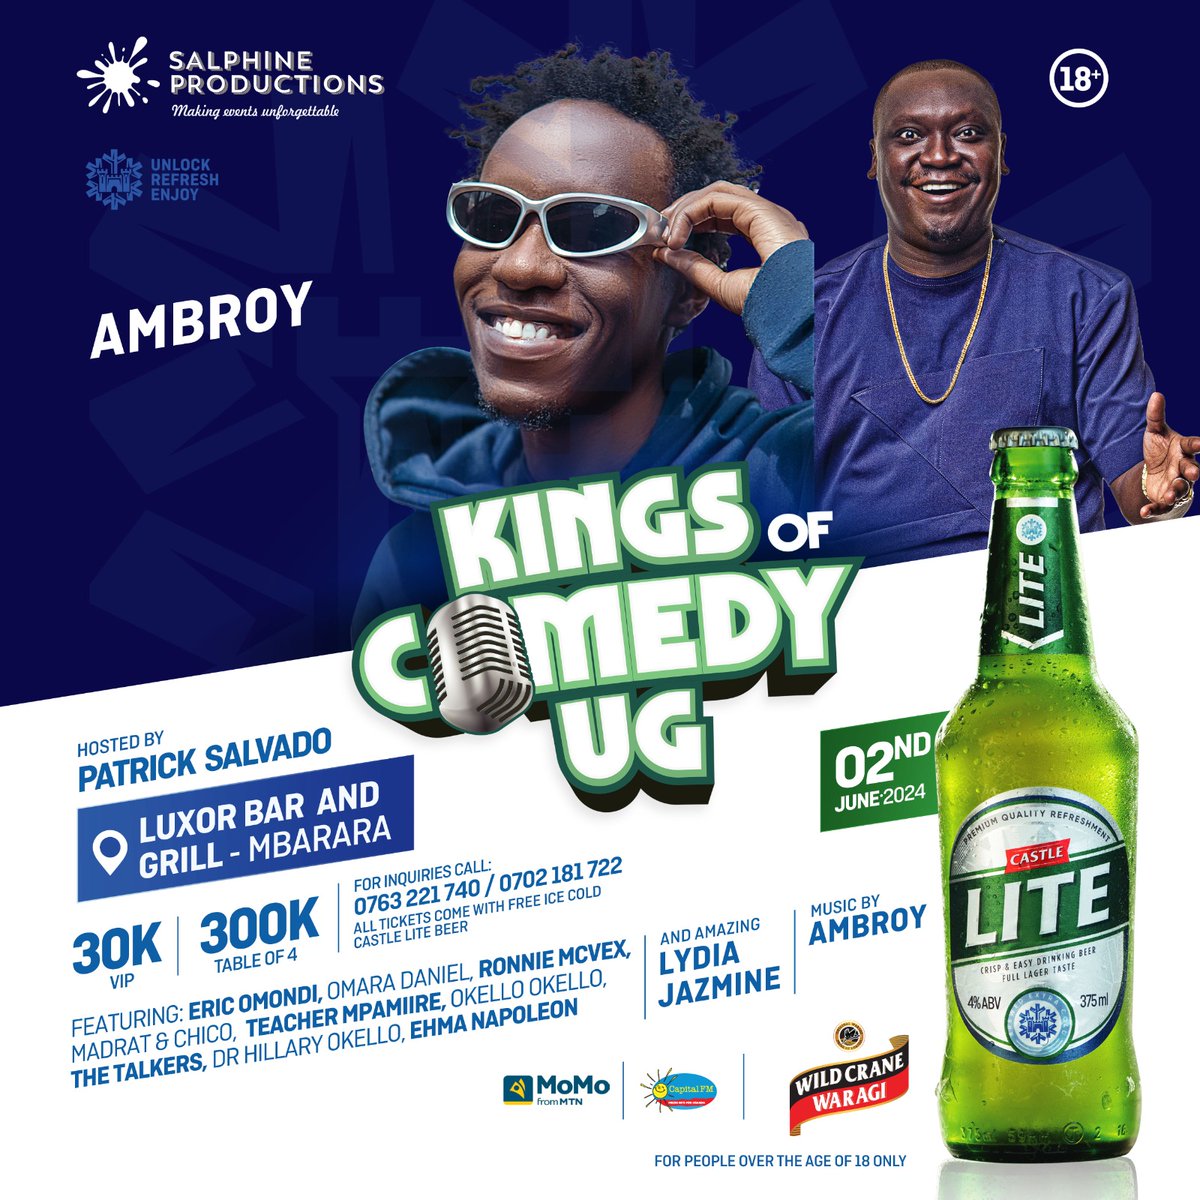 #KingsOfComedyUG won't just bring you comedians only but artists too. Enjoy ballads from @LydiahJazmine and our very own @iam_ambroy all happening at @LuxorBarMbra on 2nd June. It's the #MbararaEdition